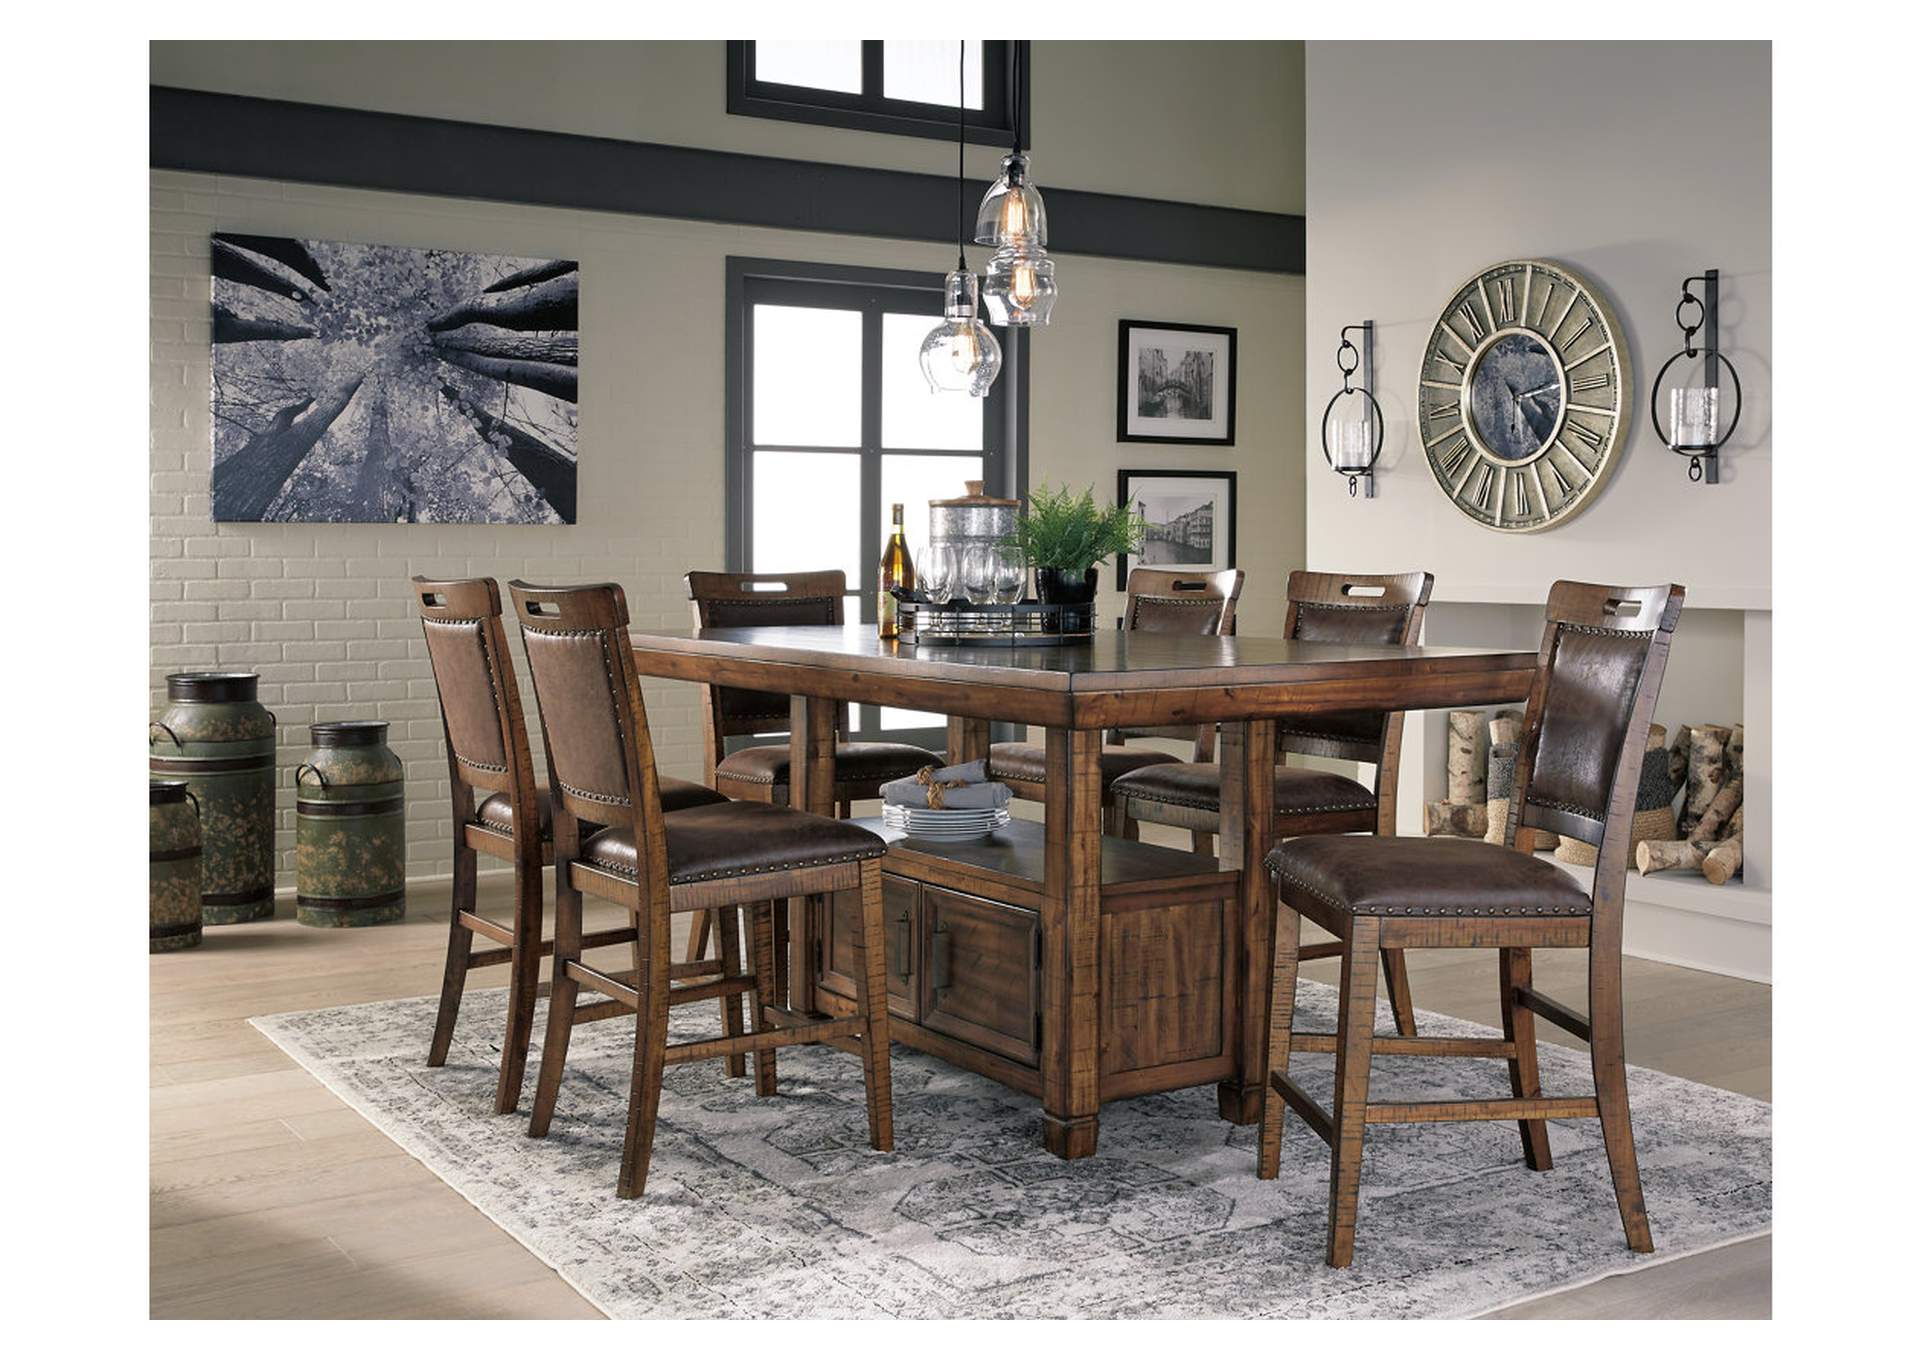 Royard Counter Height Dining Table And 6 Barstools Ashley Furniture Homestore Independently Owned And Operated By Best Furn Appliances I